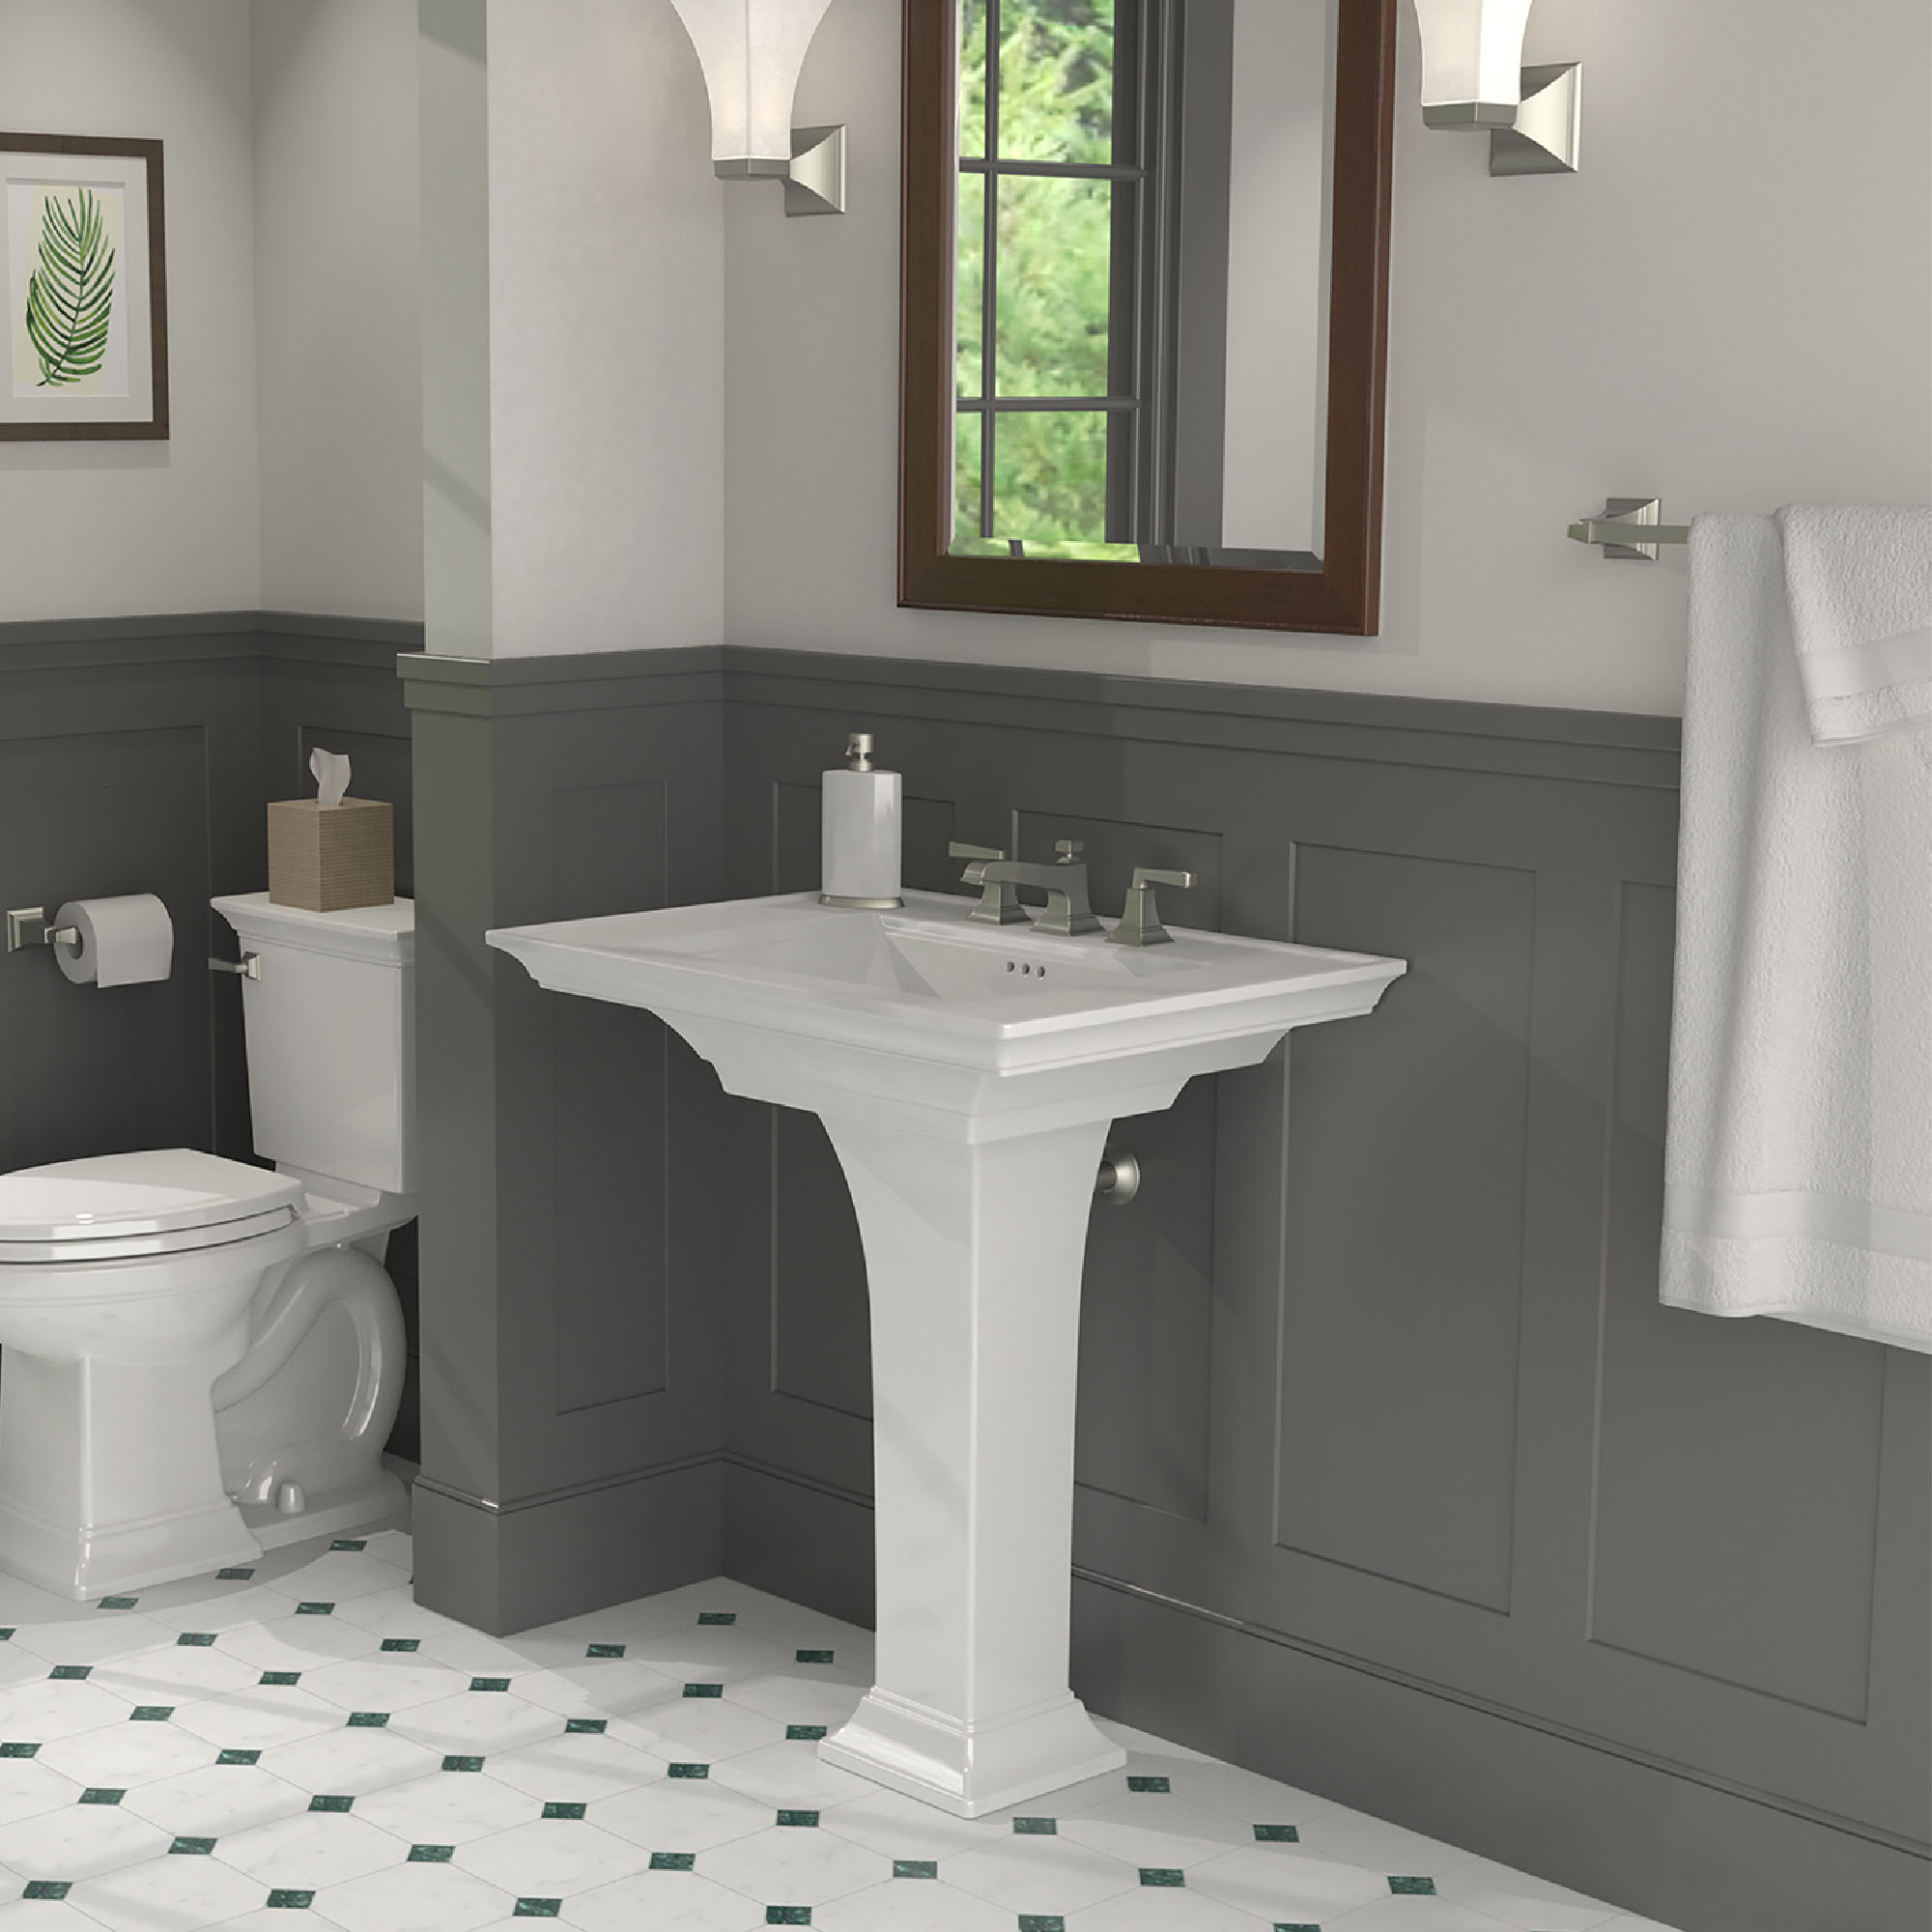 Town Square® S 8-Inch Widespread Pedestal Sink Top and Leg Combination